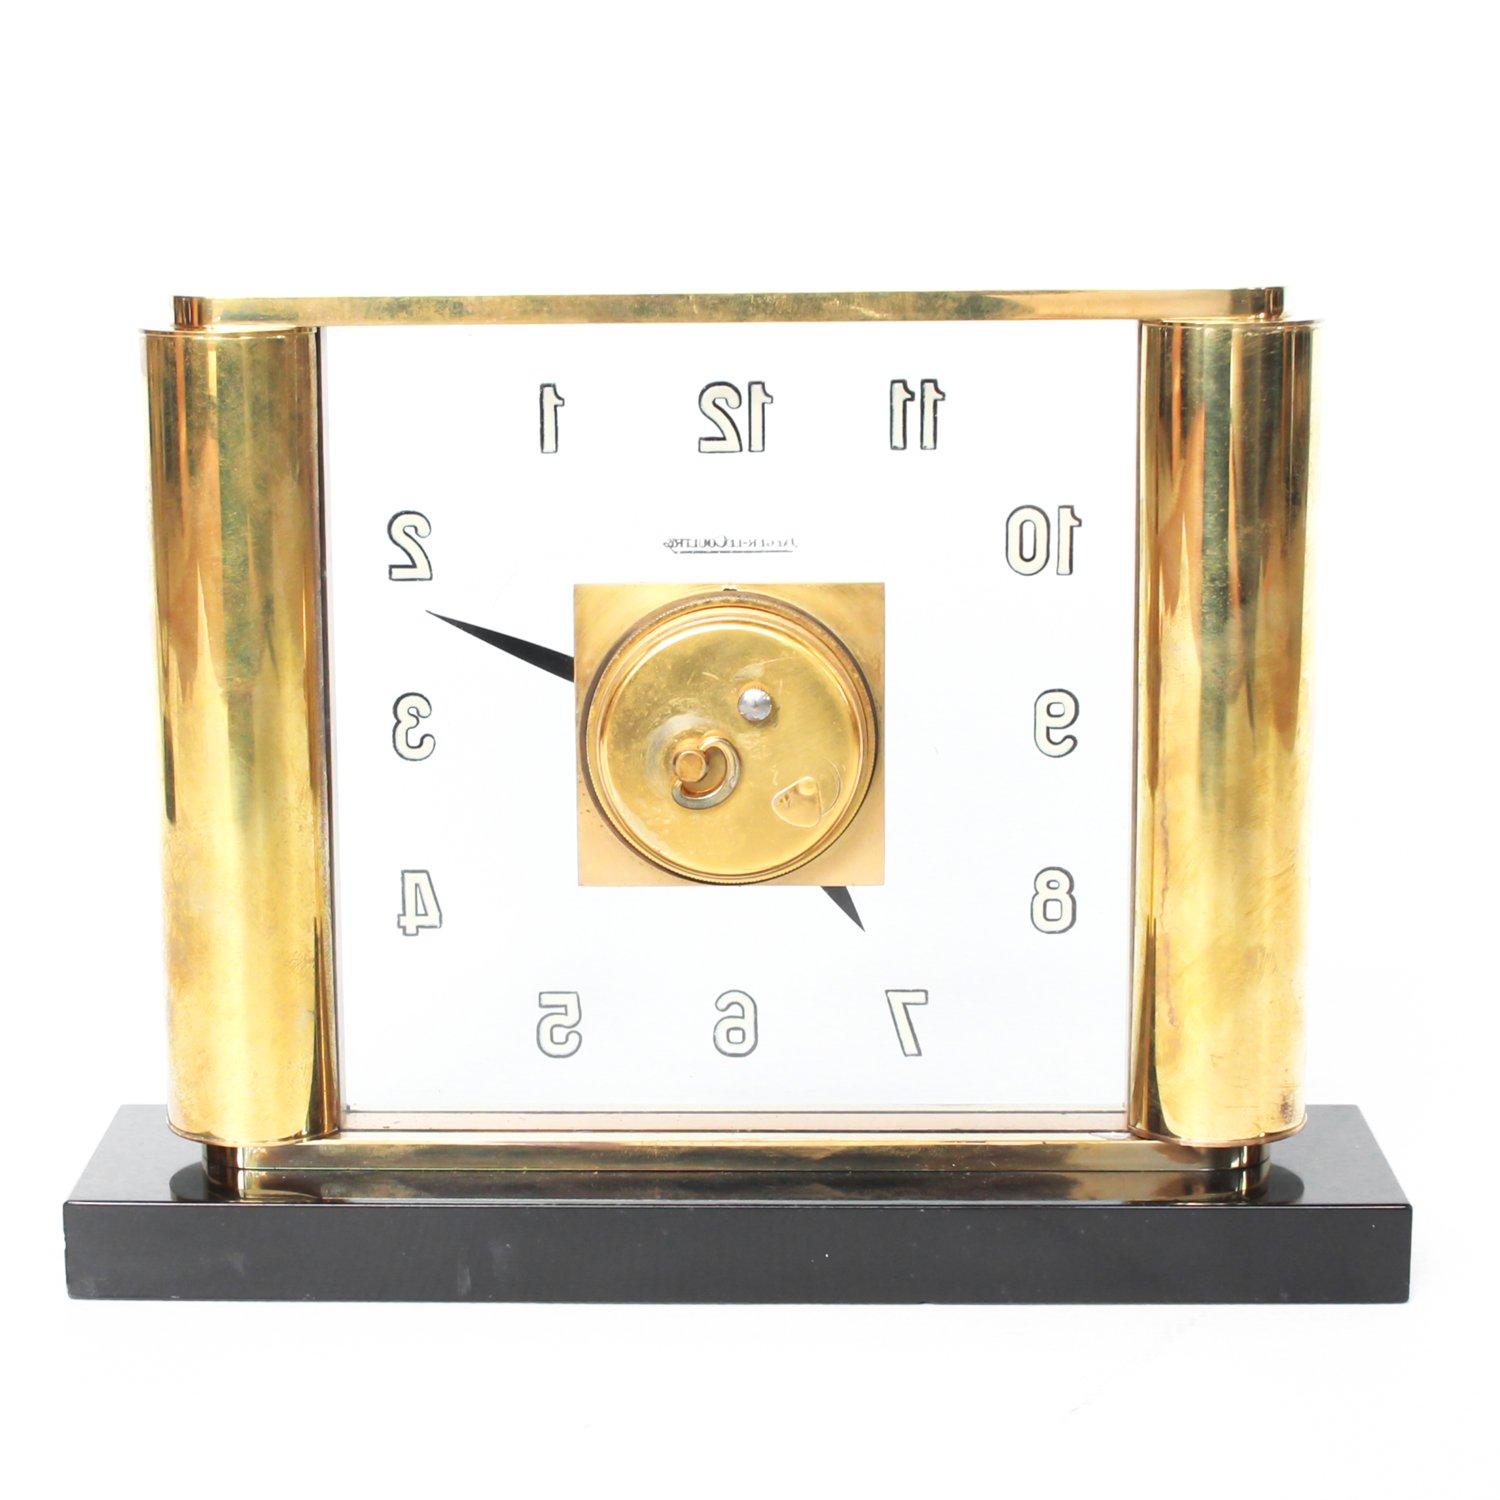 A Jaeger-LeCoultre, Art Deco, brass, and glass clock. Original mechanism with eight day movement. In good working order.

Origin: Swiss

Date: circa 1930.

